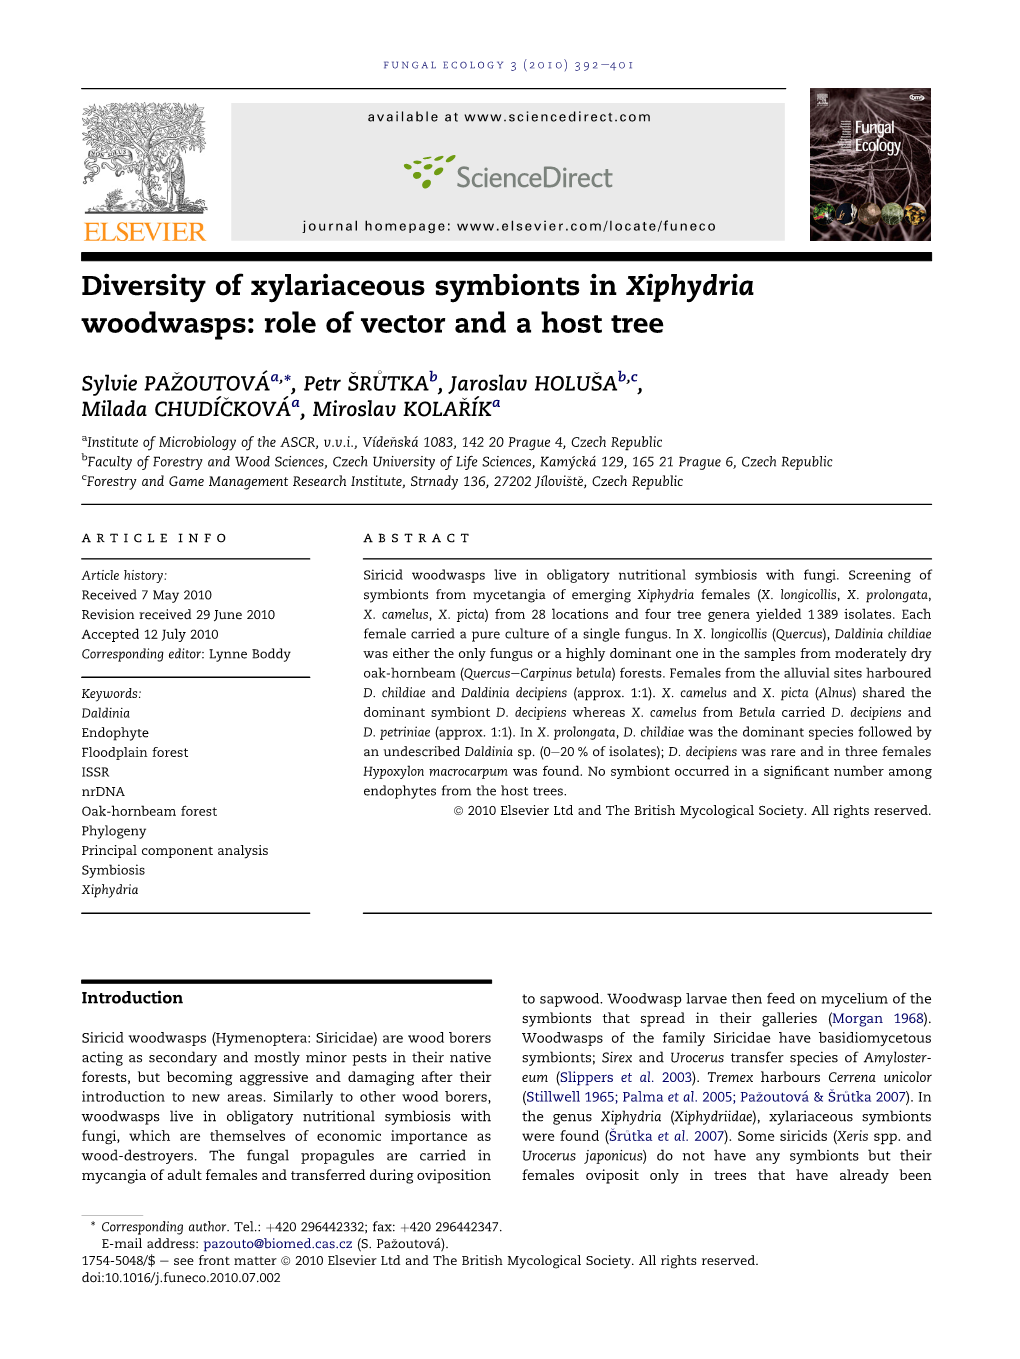 Diversity of Xylariaceous Symbionts in Xiphydria Woodwasps: Role of Vector and a Host Tree